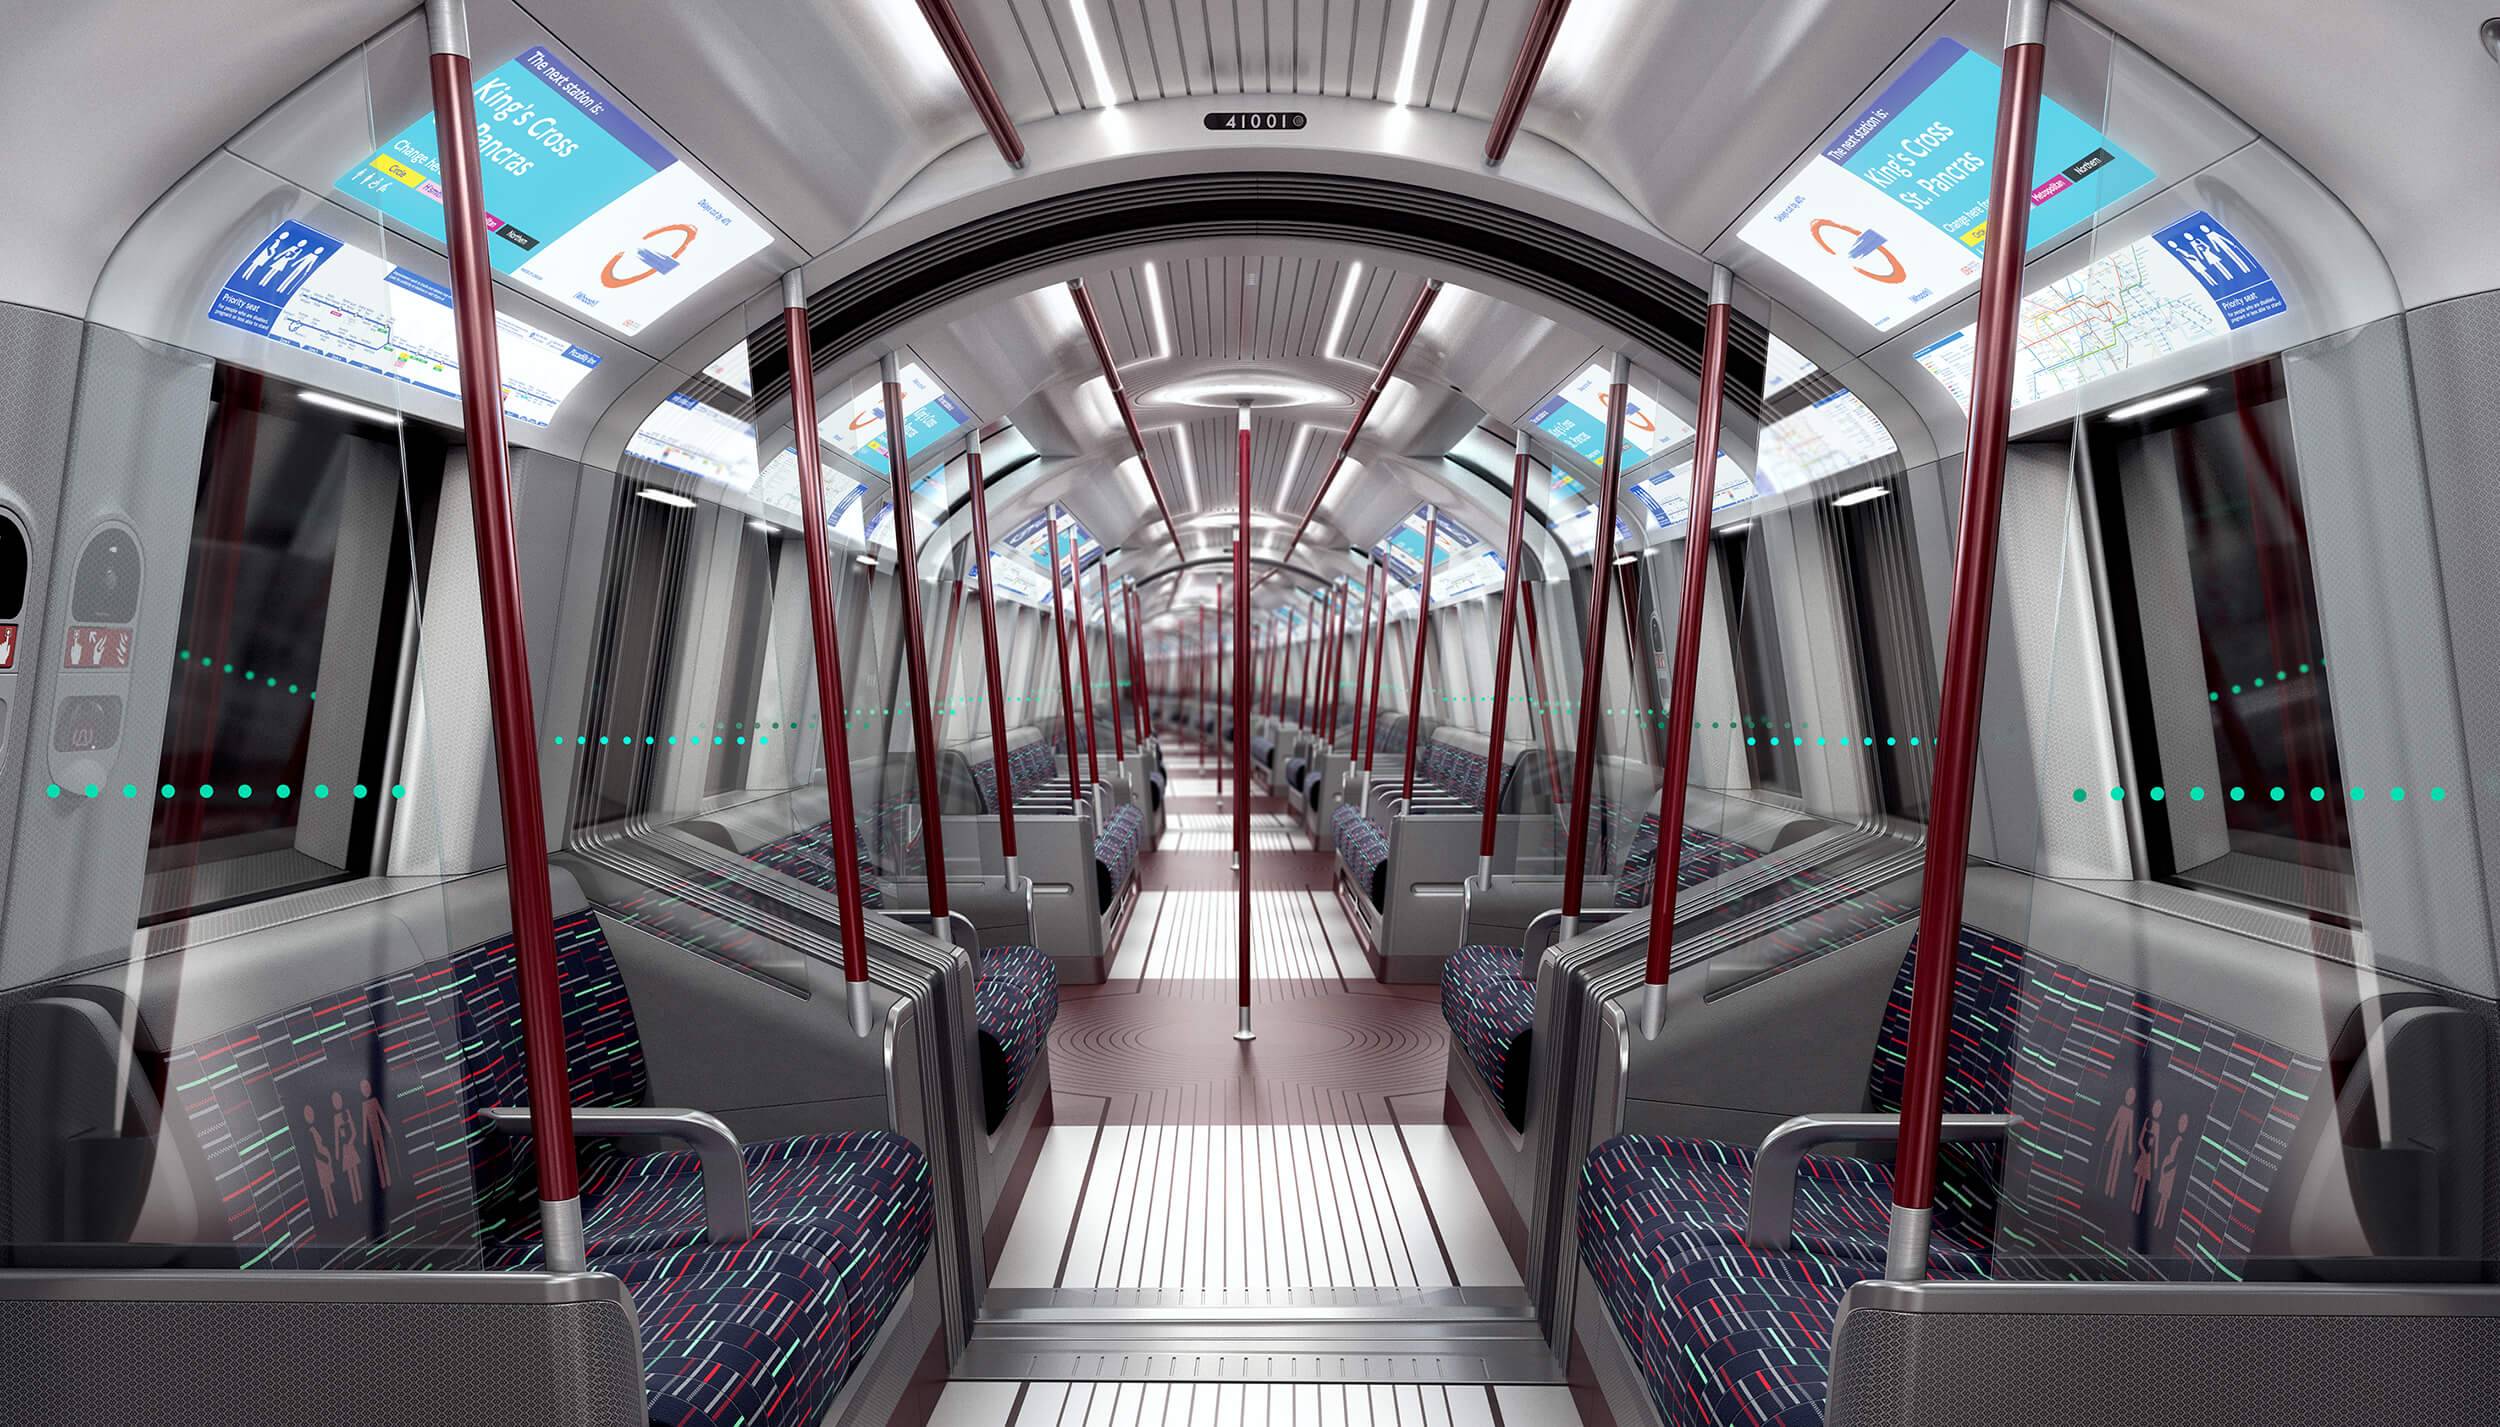 The interiors of a London Underground train carriage